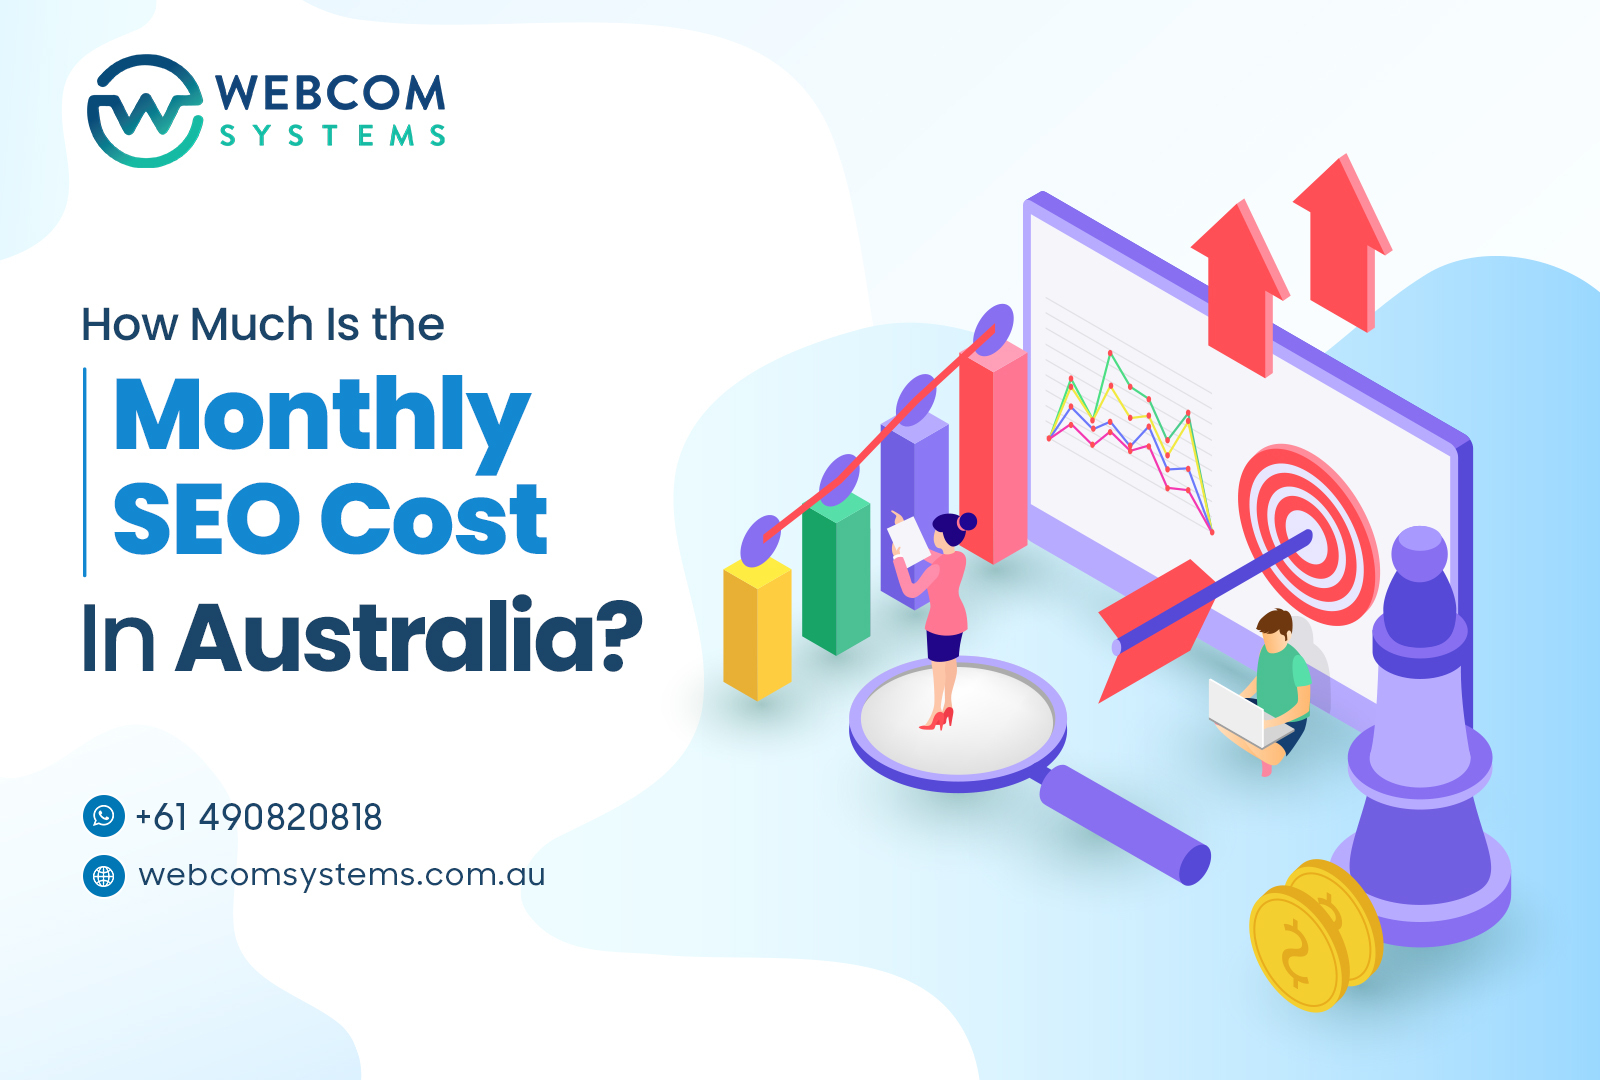 How Much is the Monthly SEO Cost In Australia